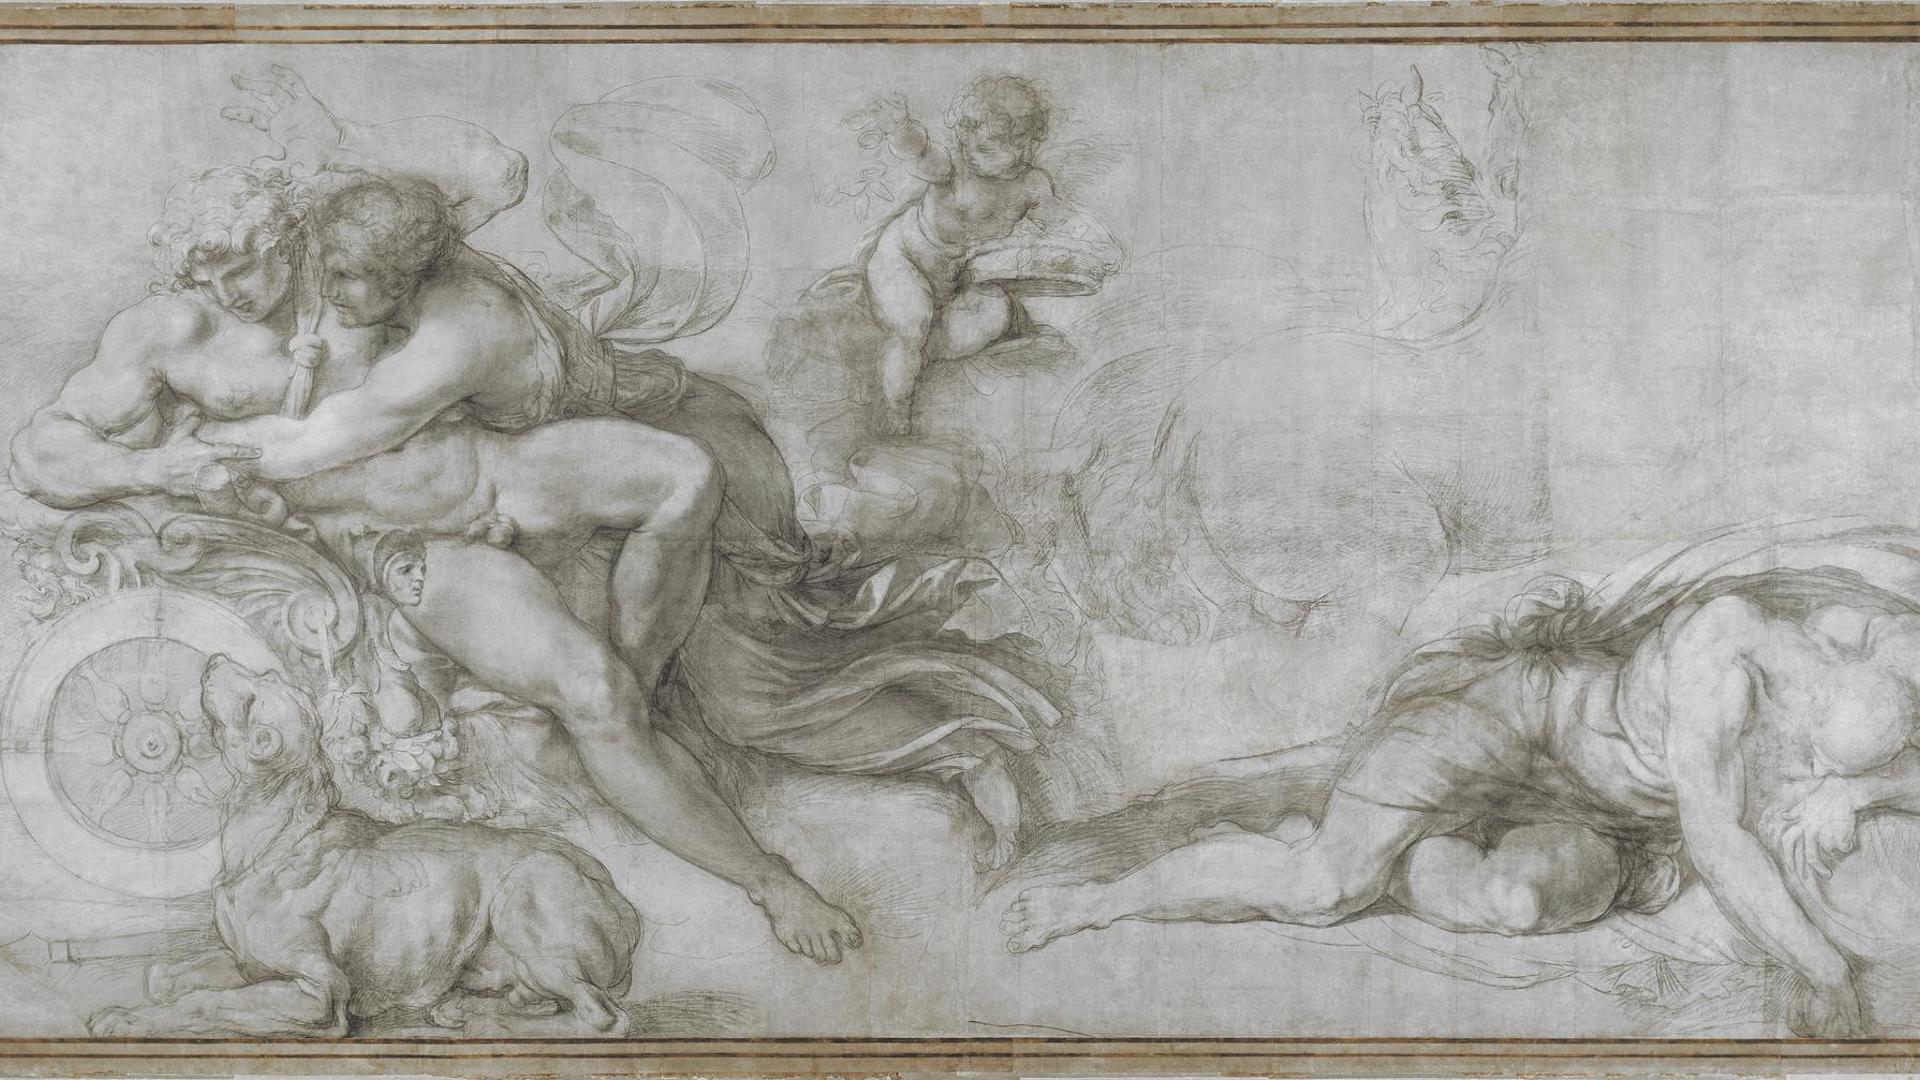 Cephalus carried off by Aurora in her Chariot by Agostino Carracci